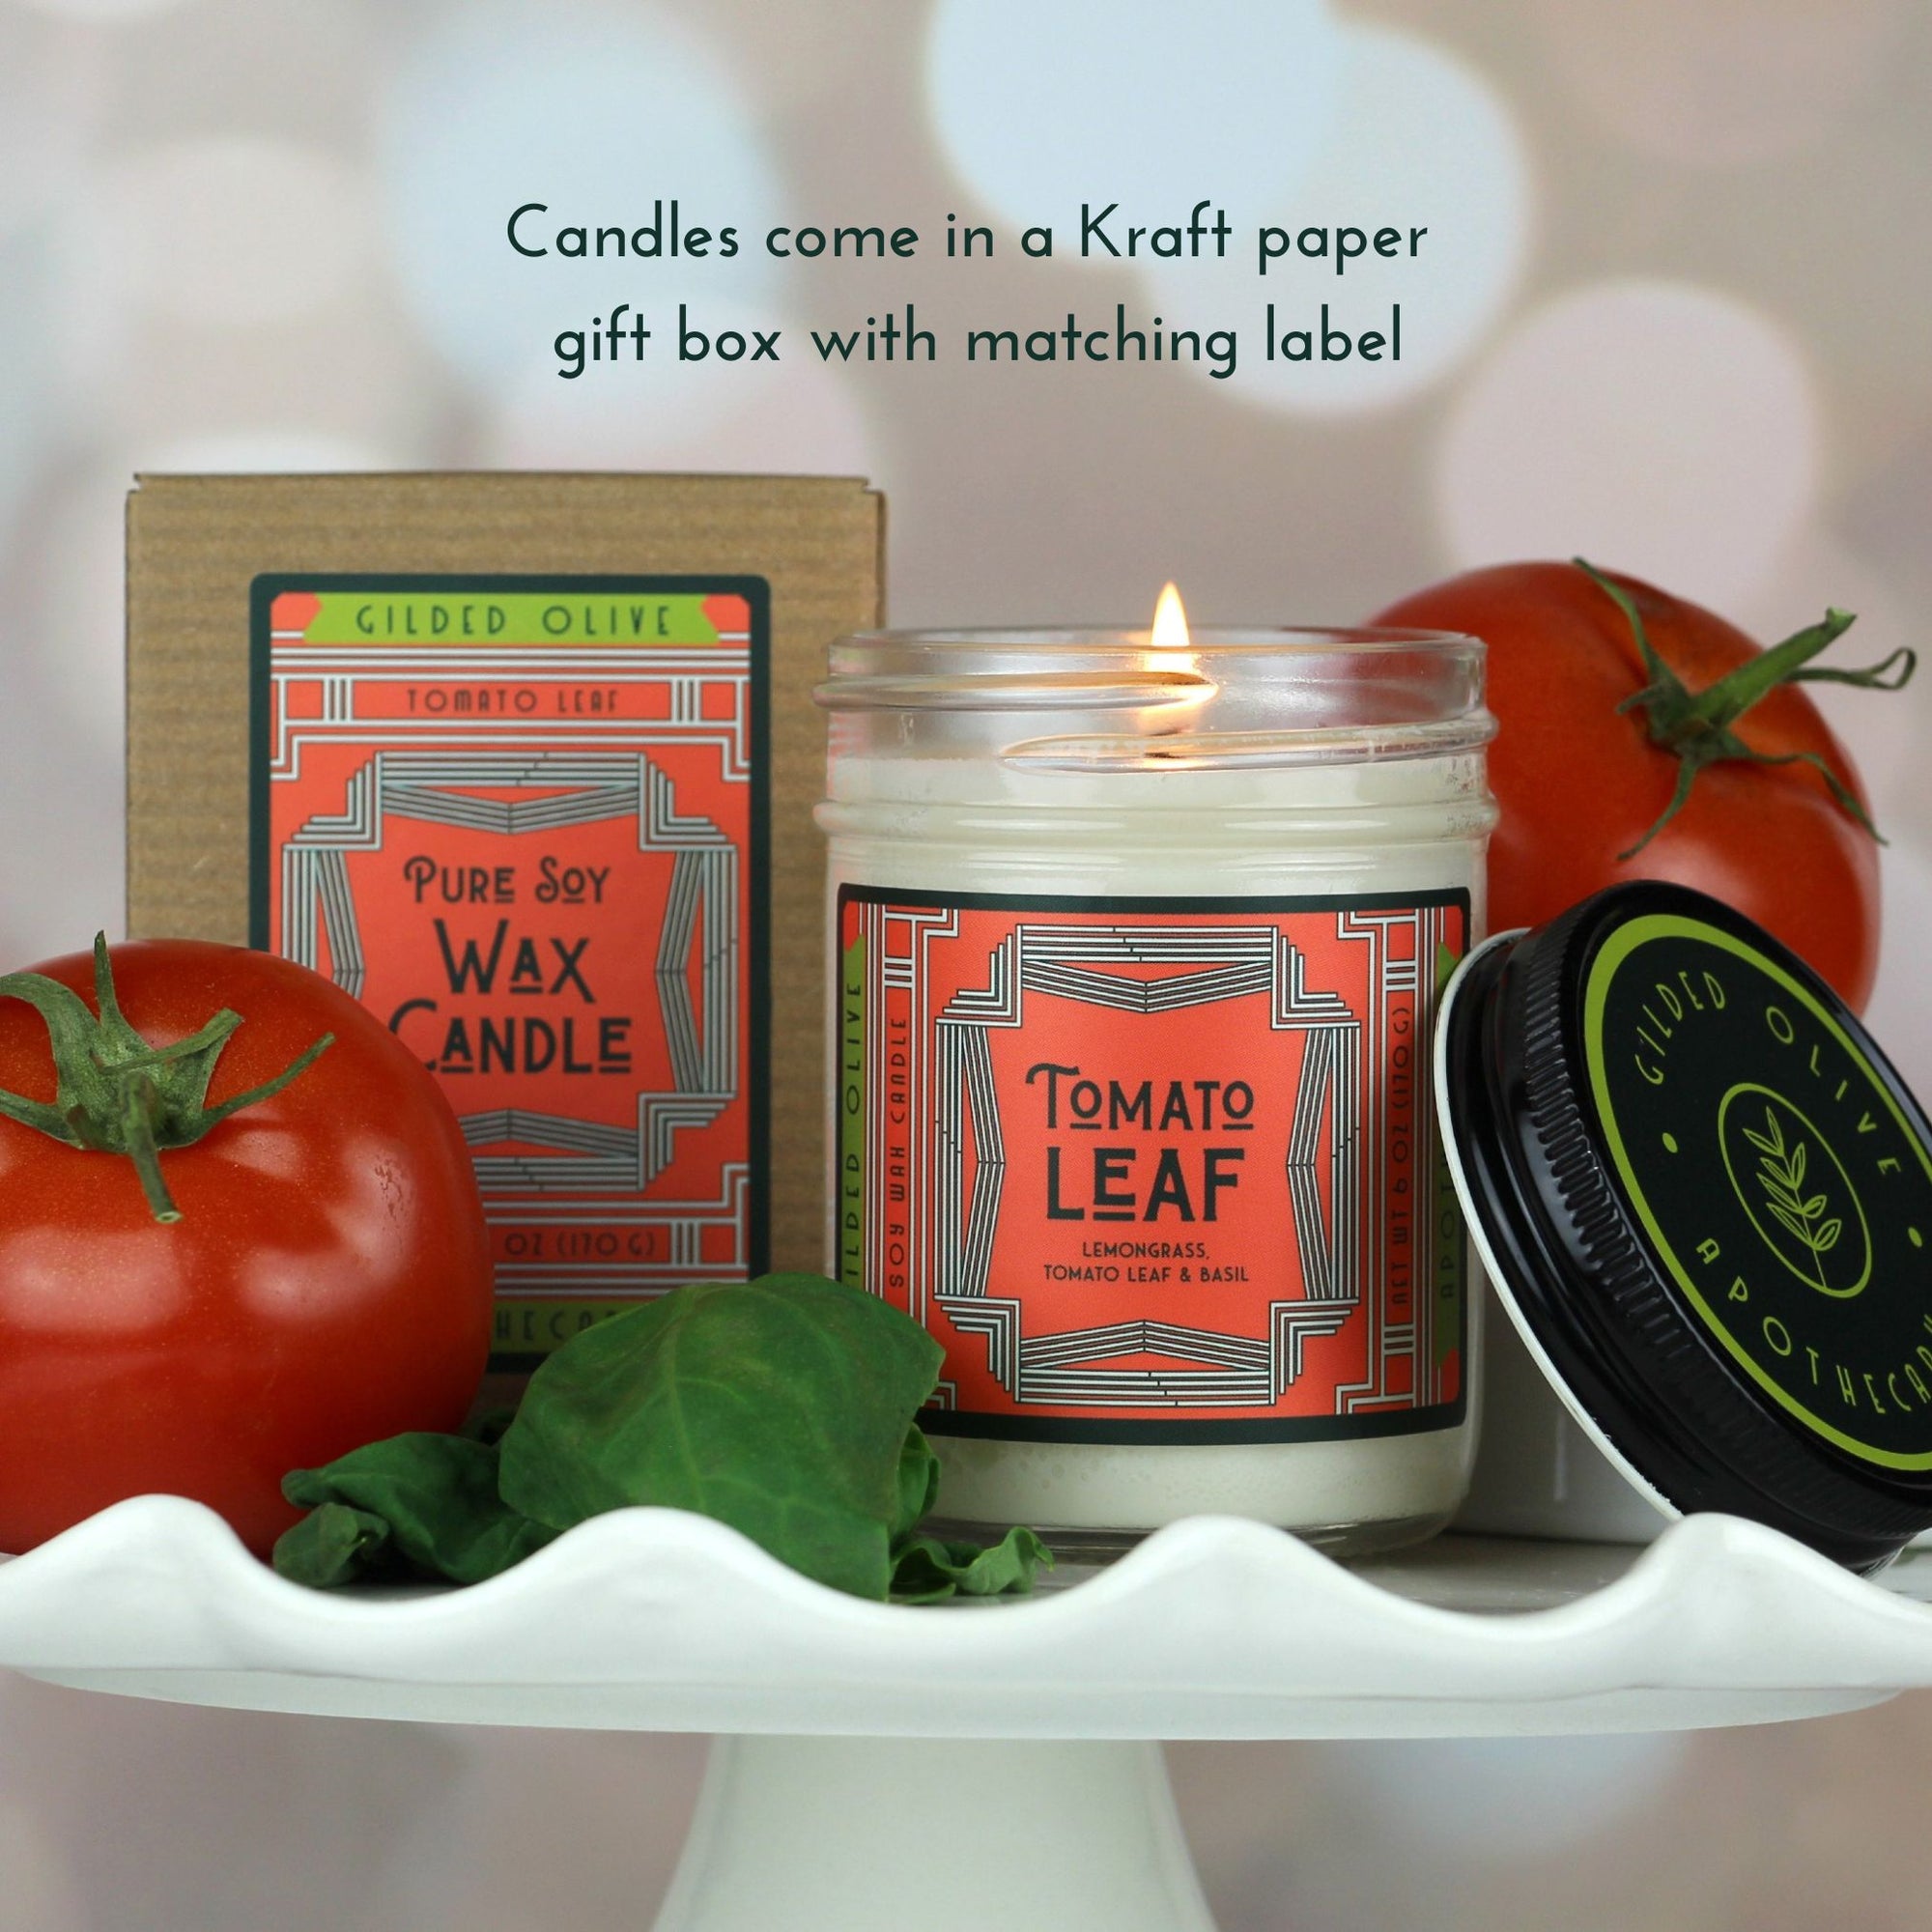 Candles come with matching gift boxes